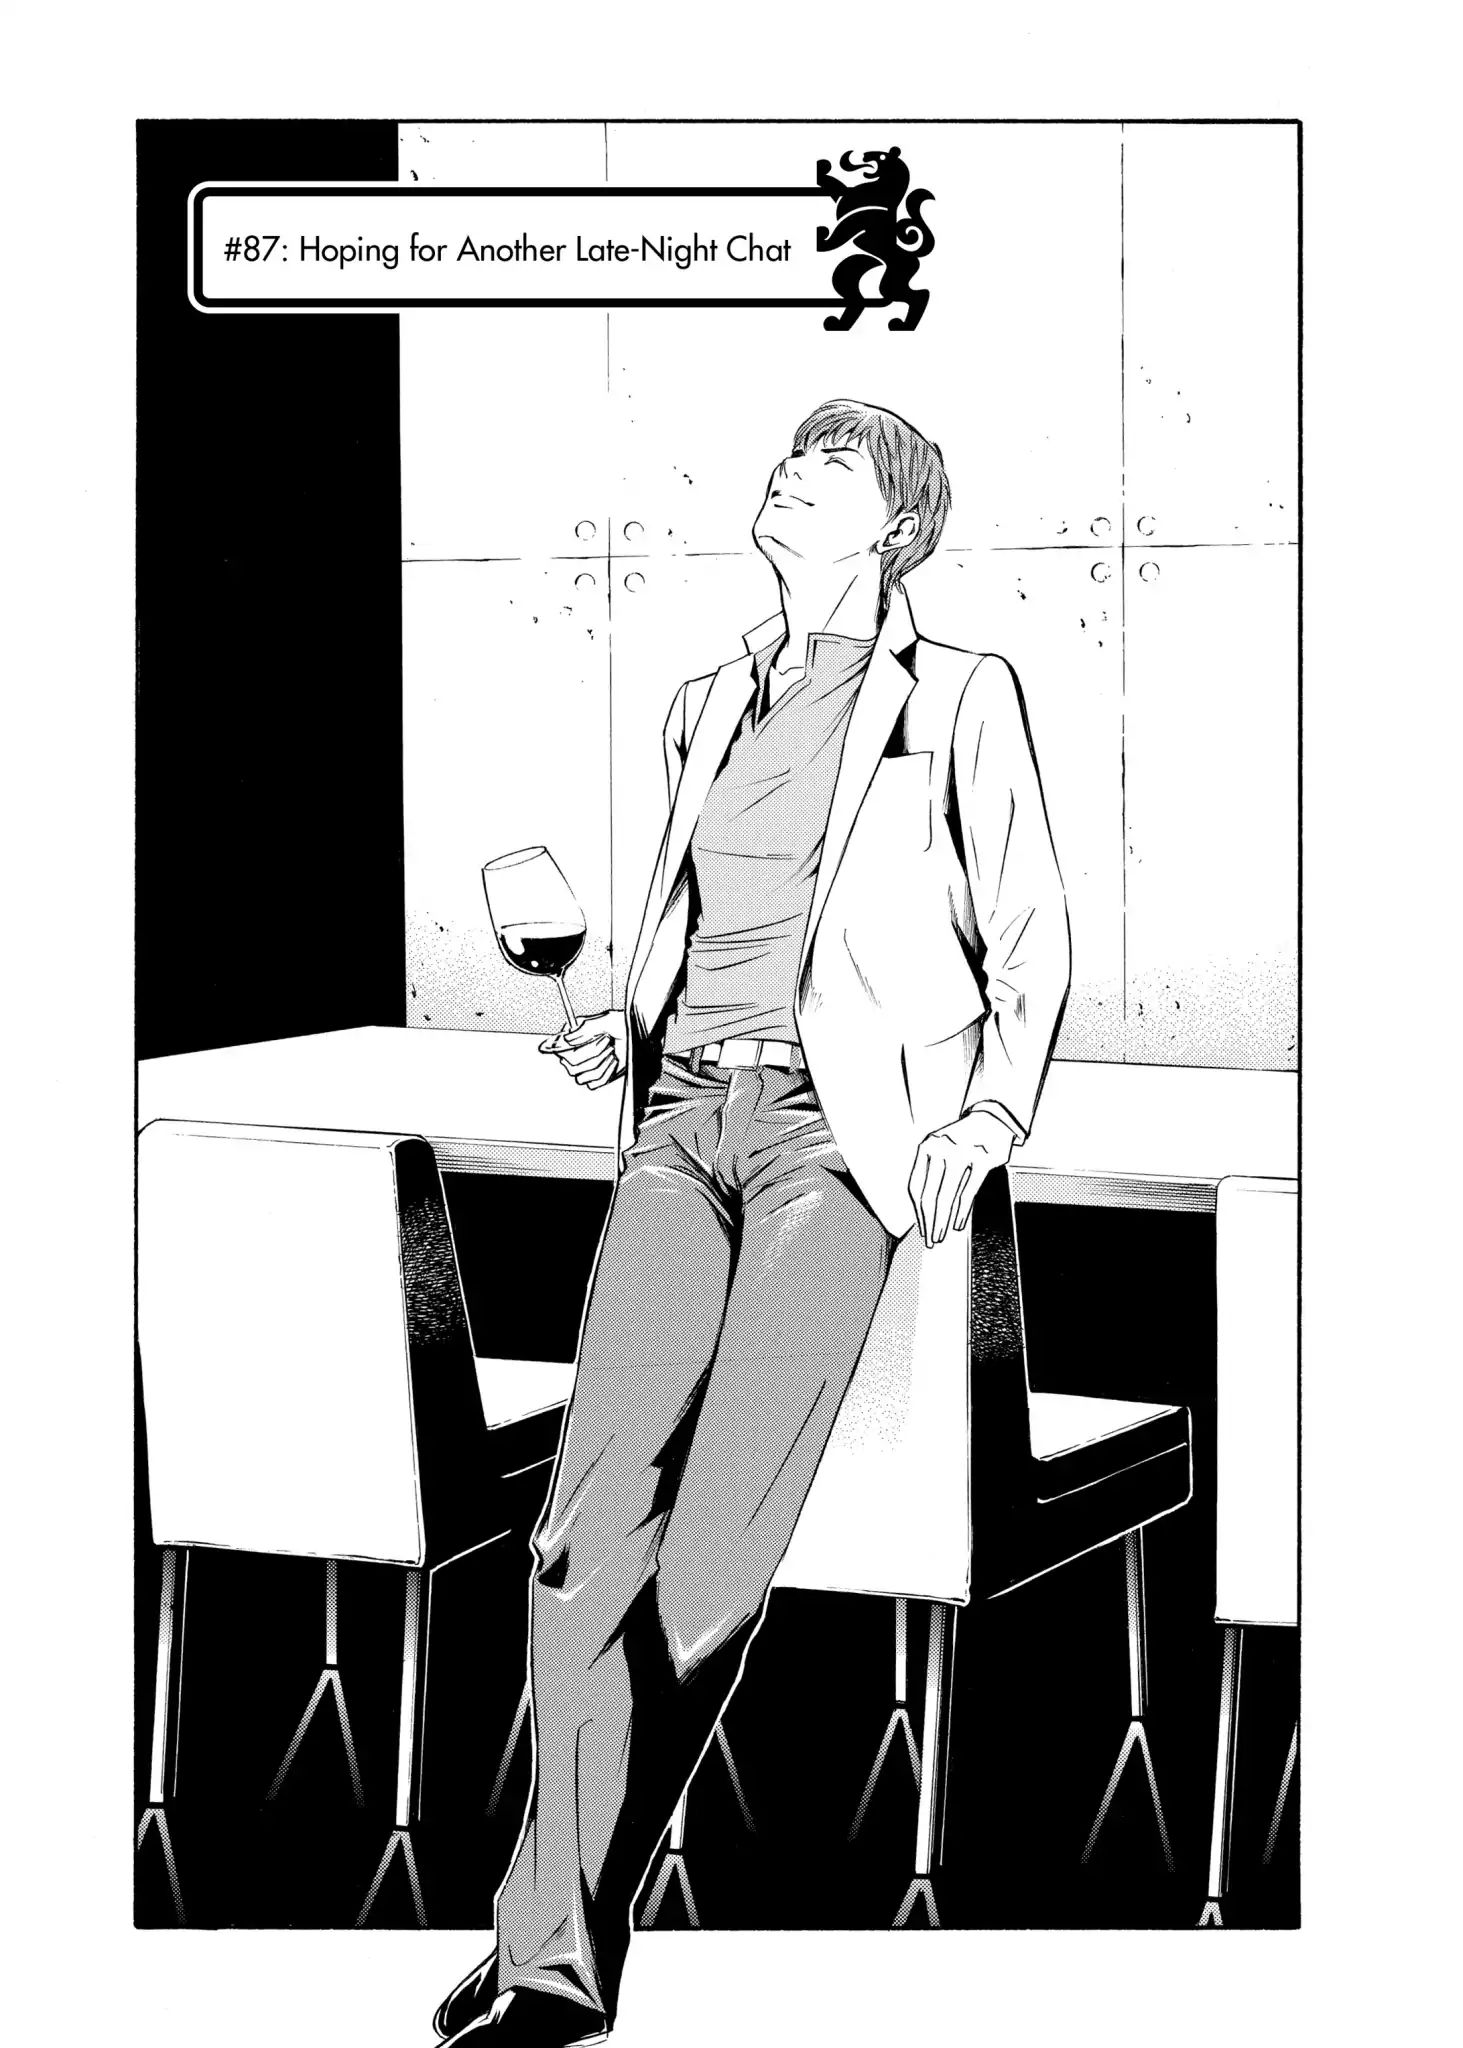 Kami No Shizuku Vol.9 Chapter 87: Hoping For Another Late-Night Chat - Picture 1